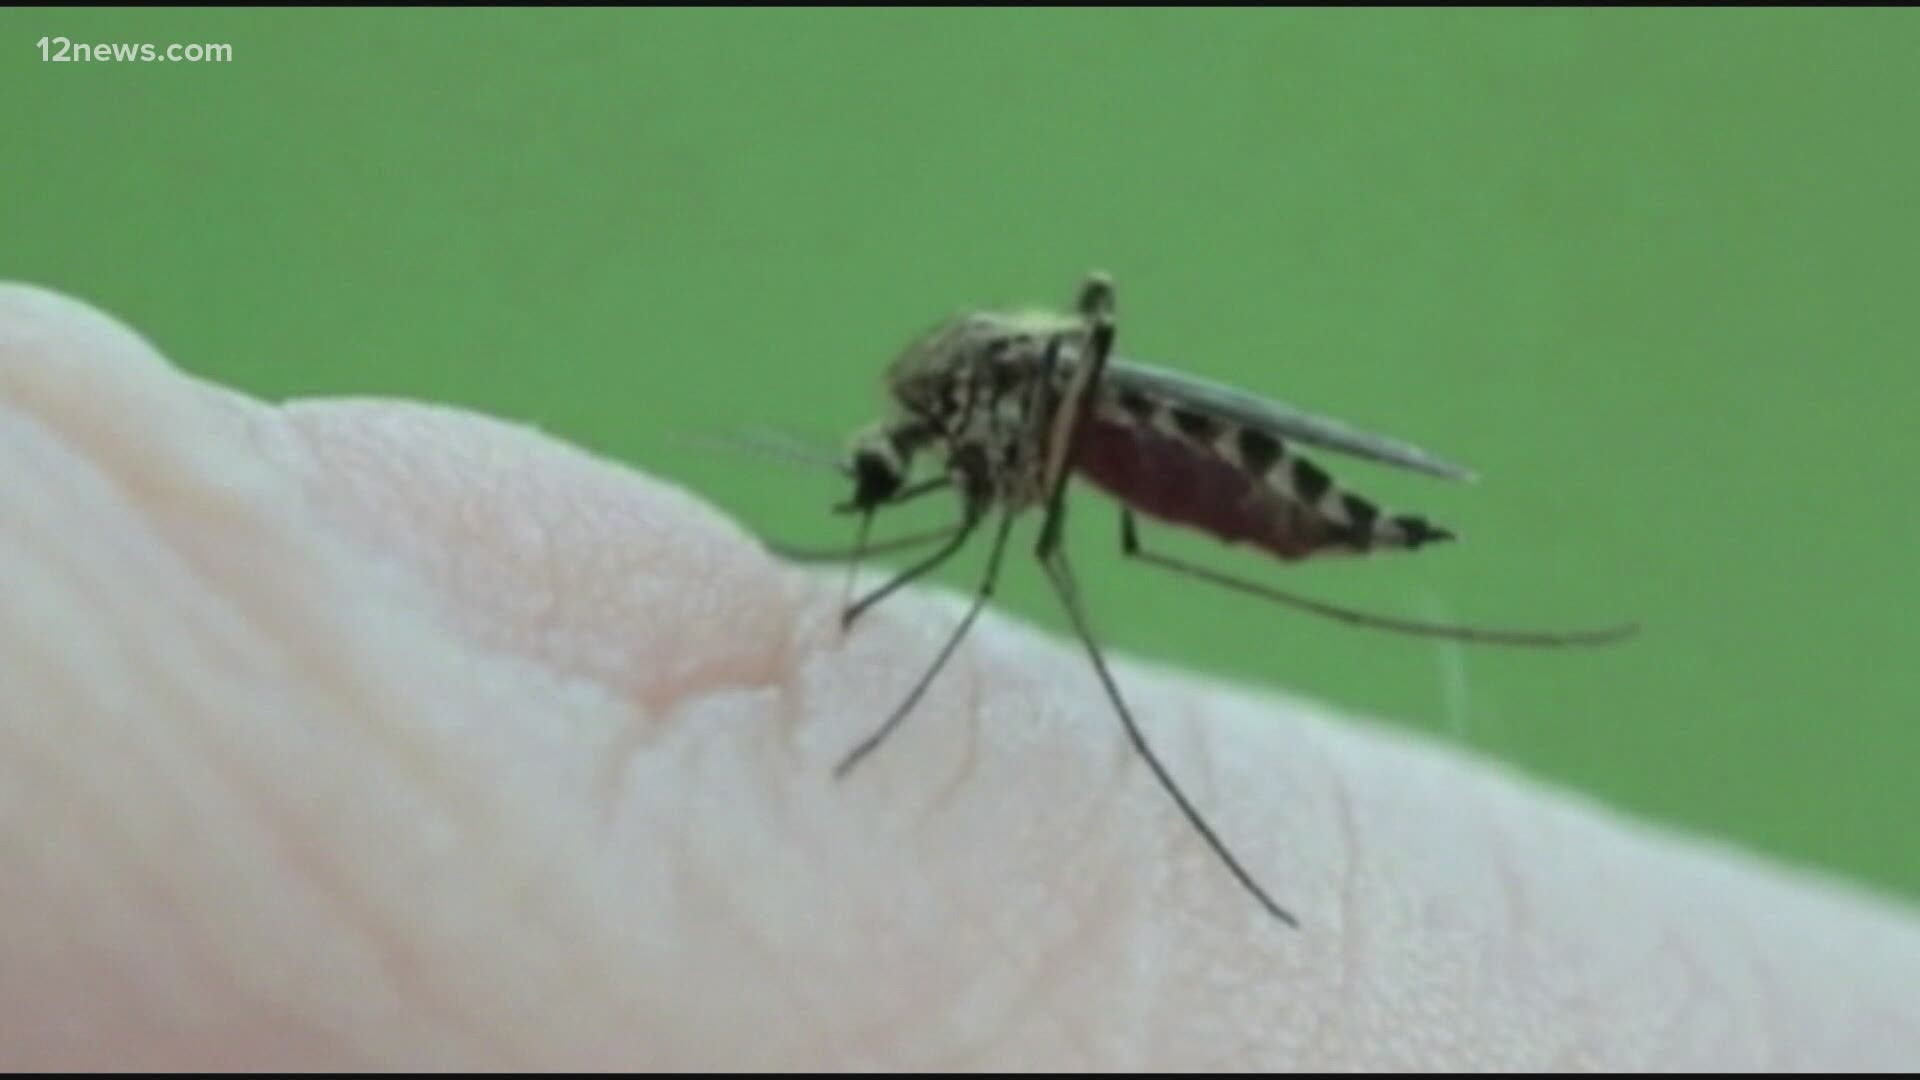 Are you having trouble getting rid of mosquitoes at your home? An expert offers some tips on dealing with the pesky pests.